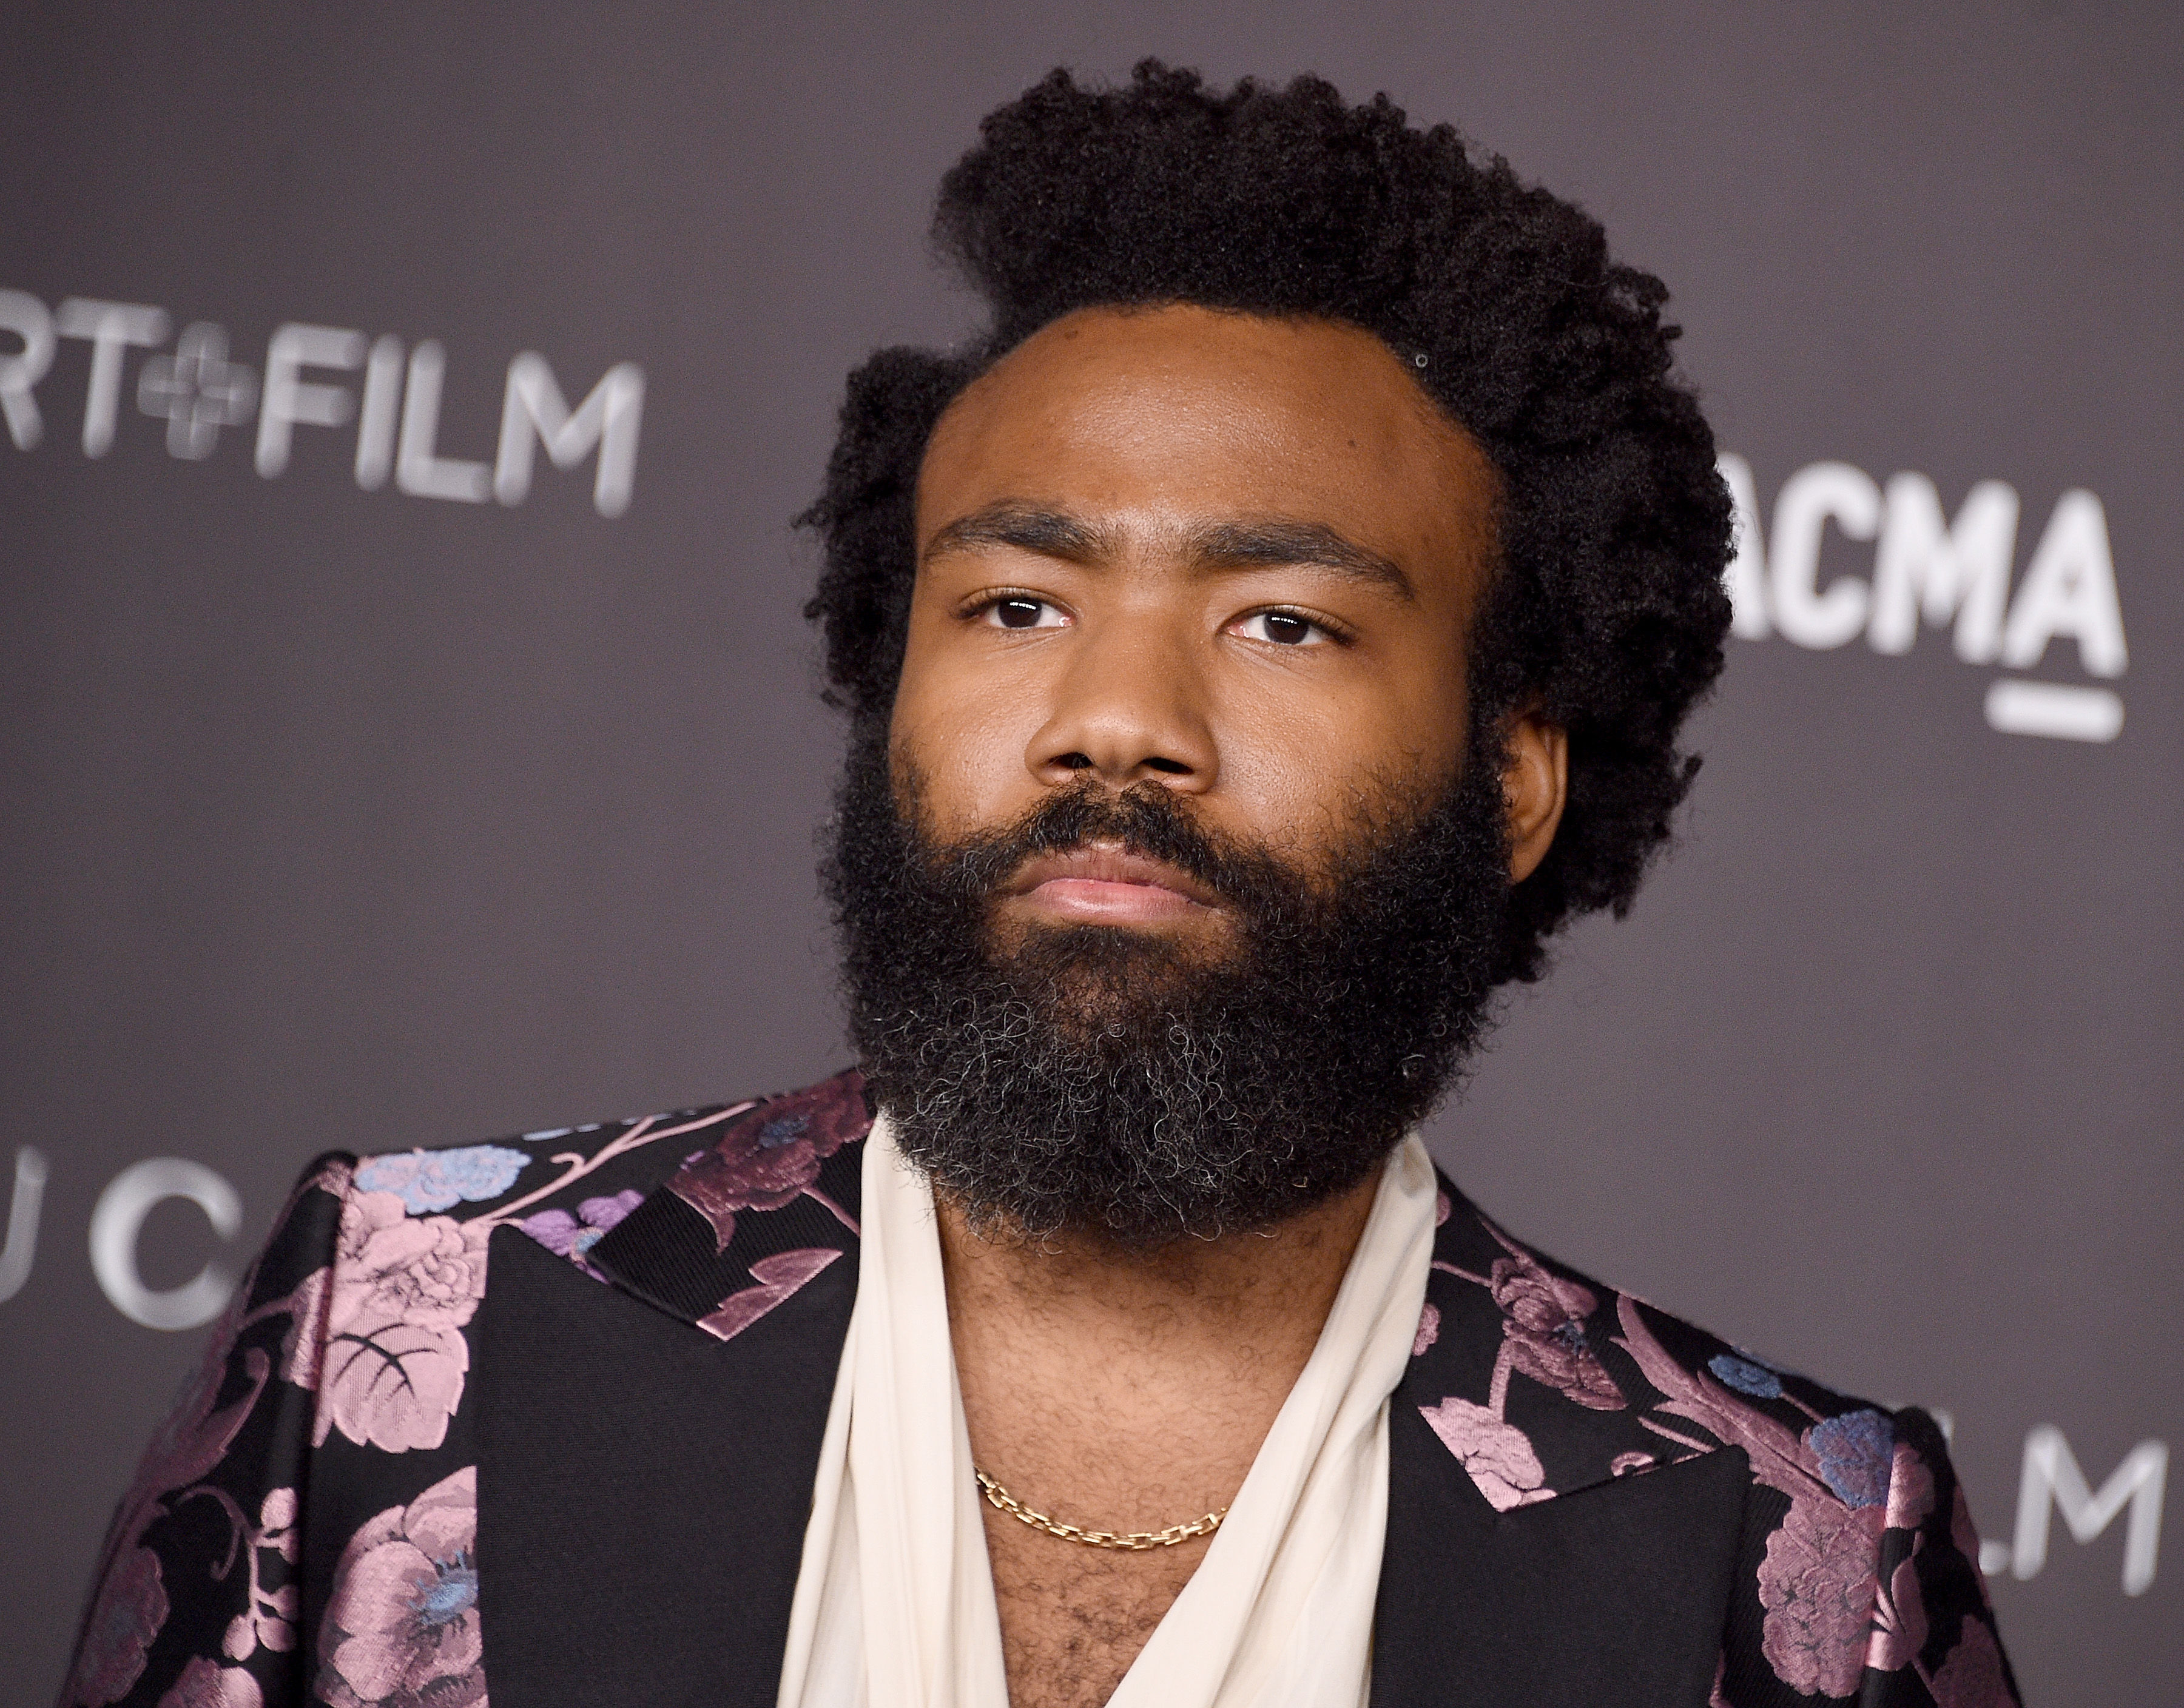 Donald Glover arrives at the 2019 LACMA Art + Film Gala in Los Angeles (Gregg DeGuire—FilmMagic via Getty Images)